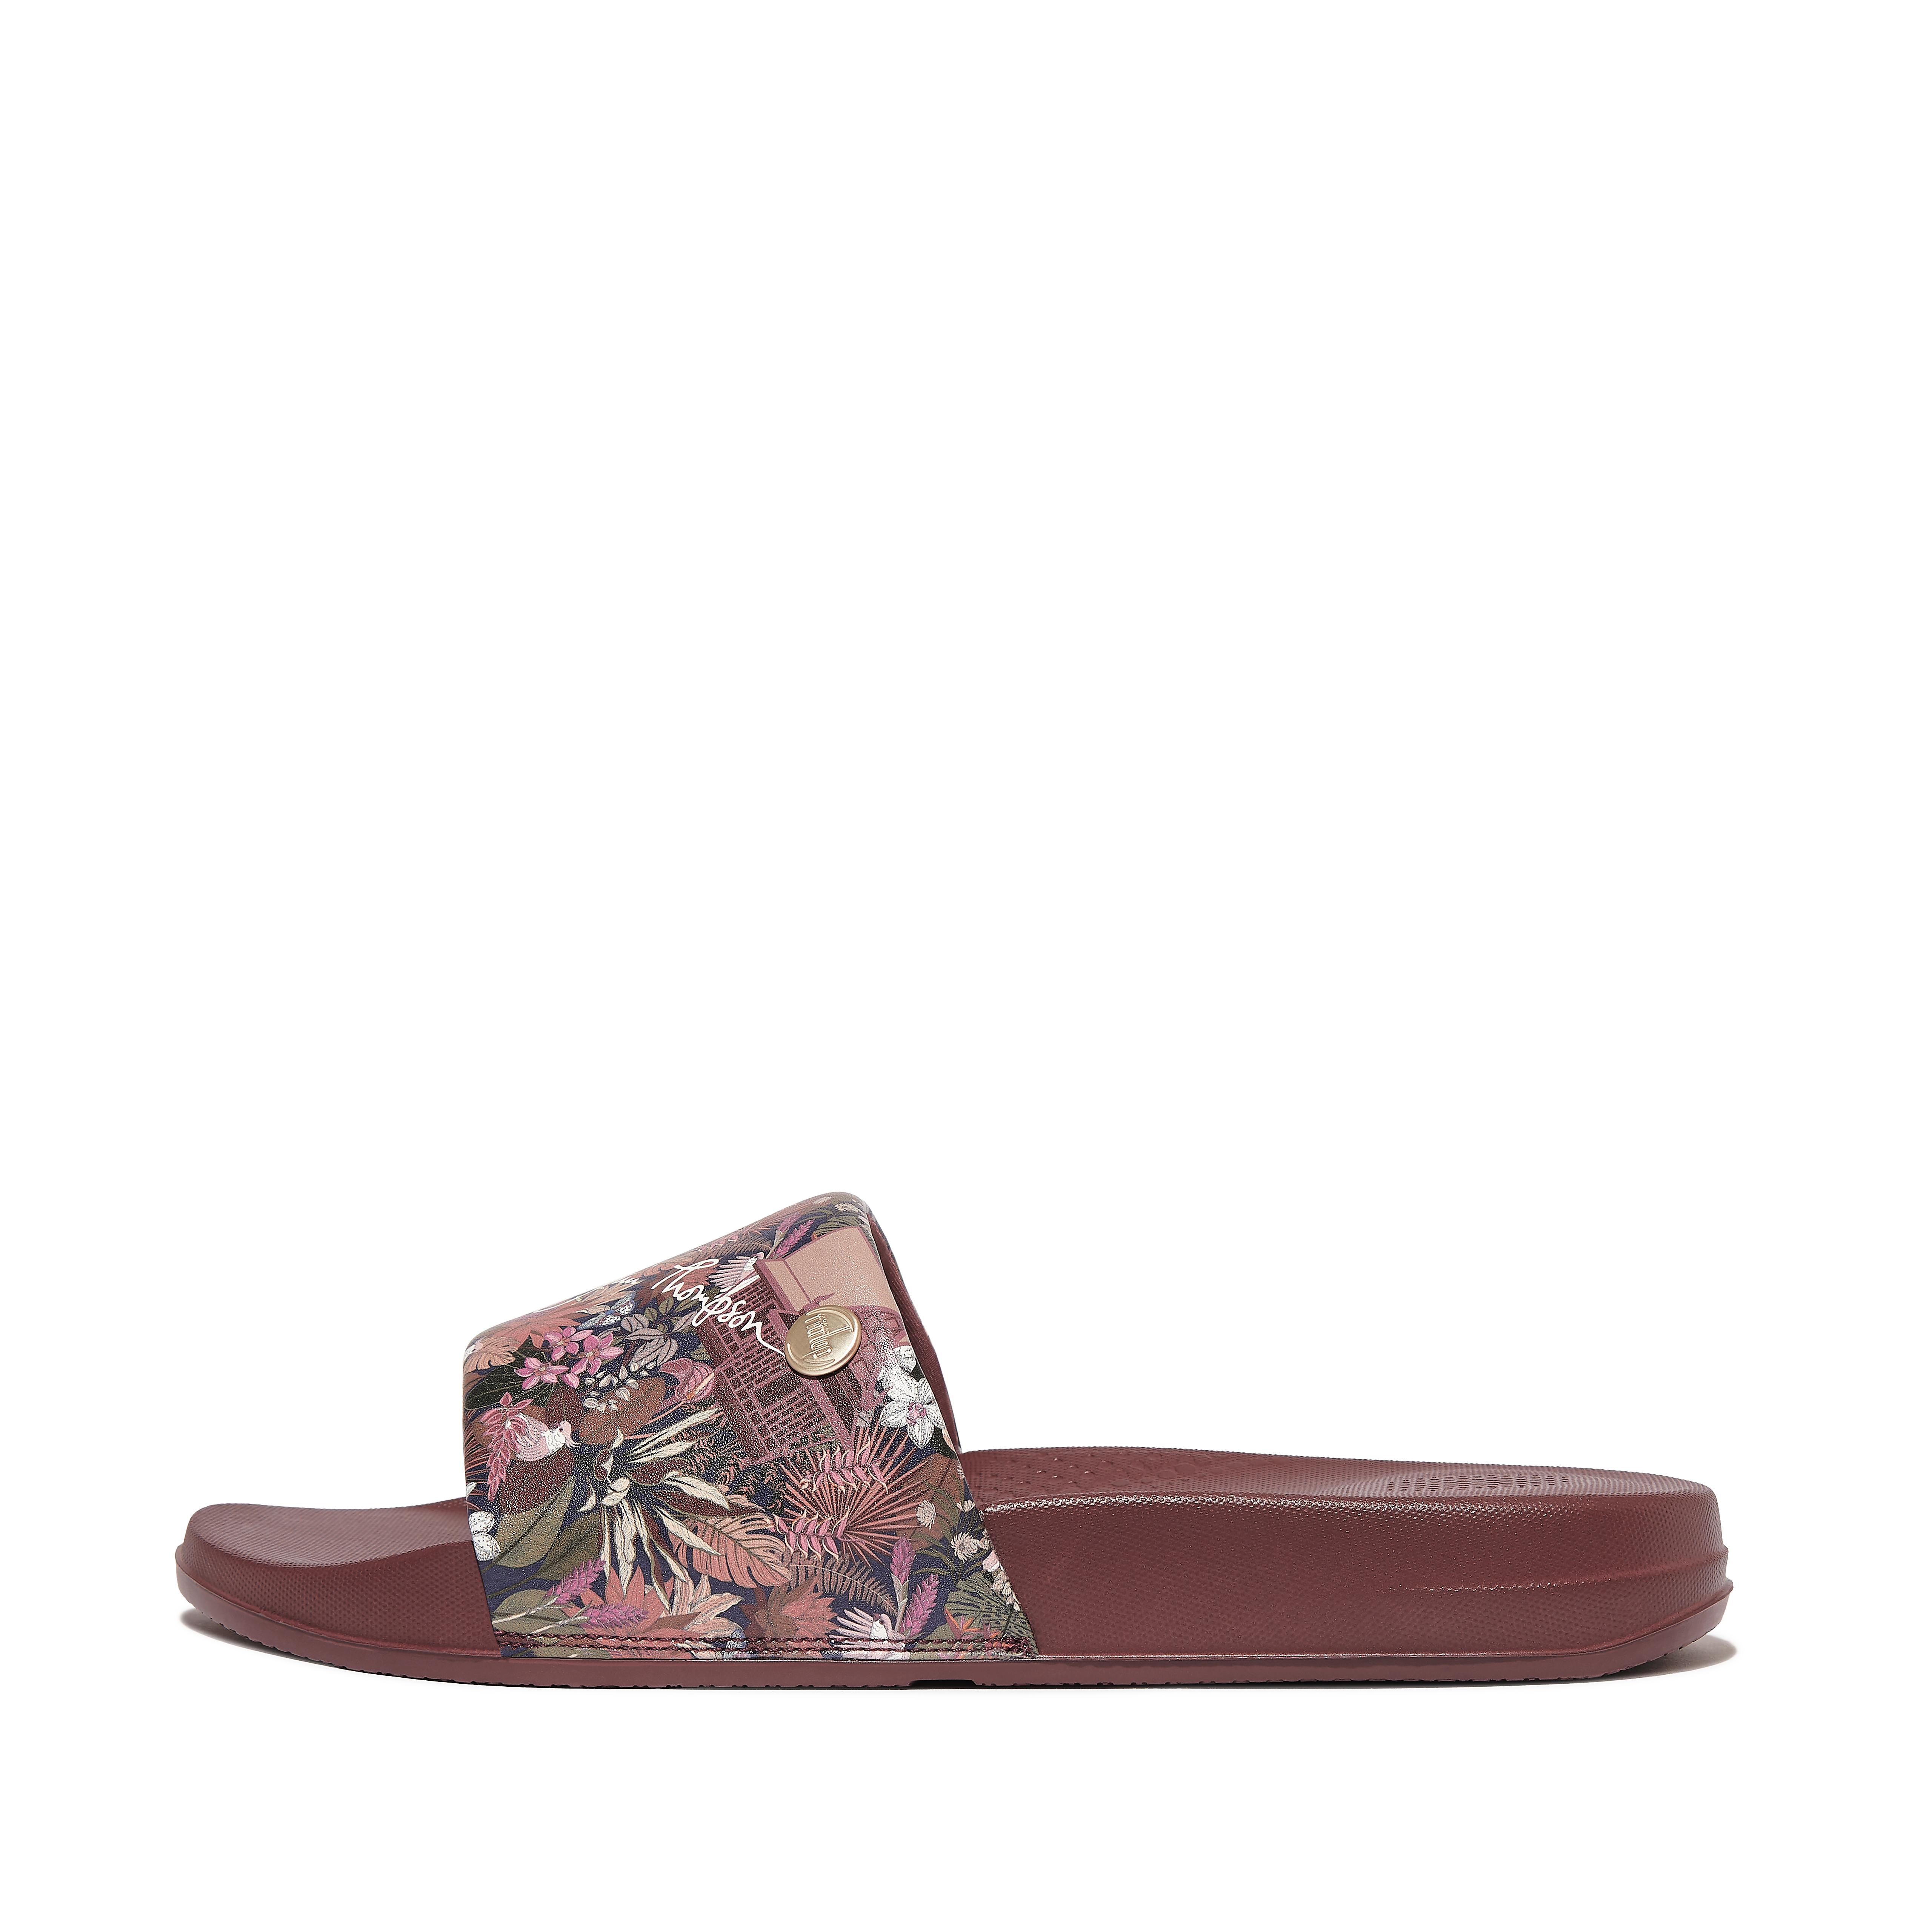 Fitflop X Jim Thompson Limited-Edition Slides,Java Brown